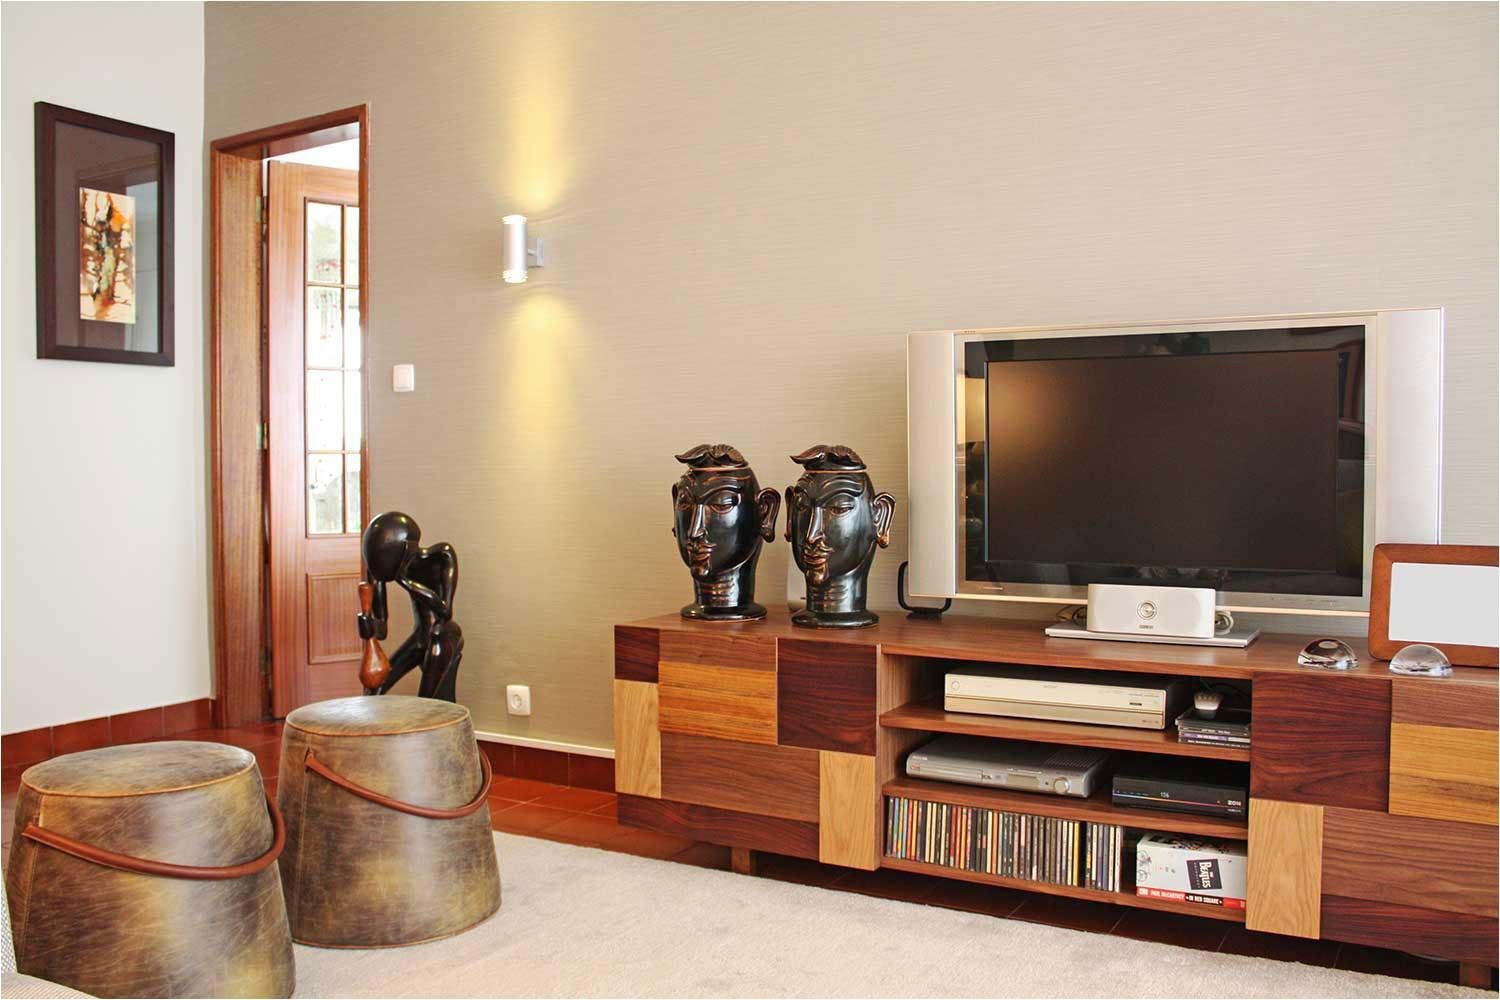 Form tv stand is a high quality product by Mambo Unlimited Ideas, crafted in polished or matte wood veneer structure and feet, combining natural oak, natural walnut, dark walnut and iron wood. It features three dimensional designs on its doors, an